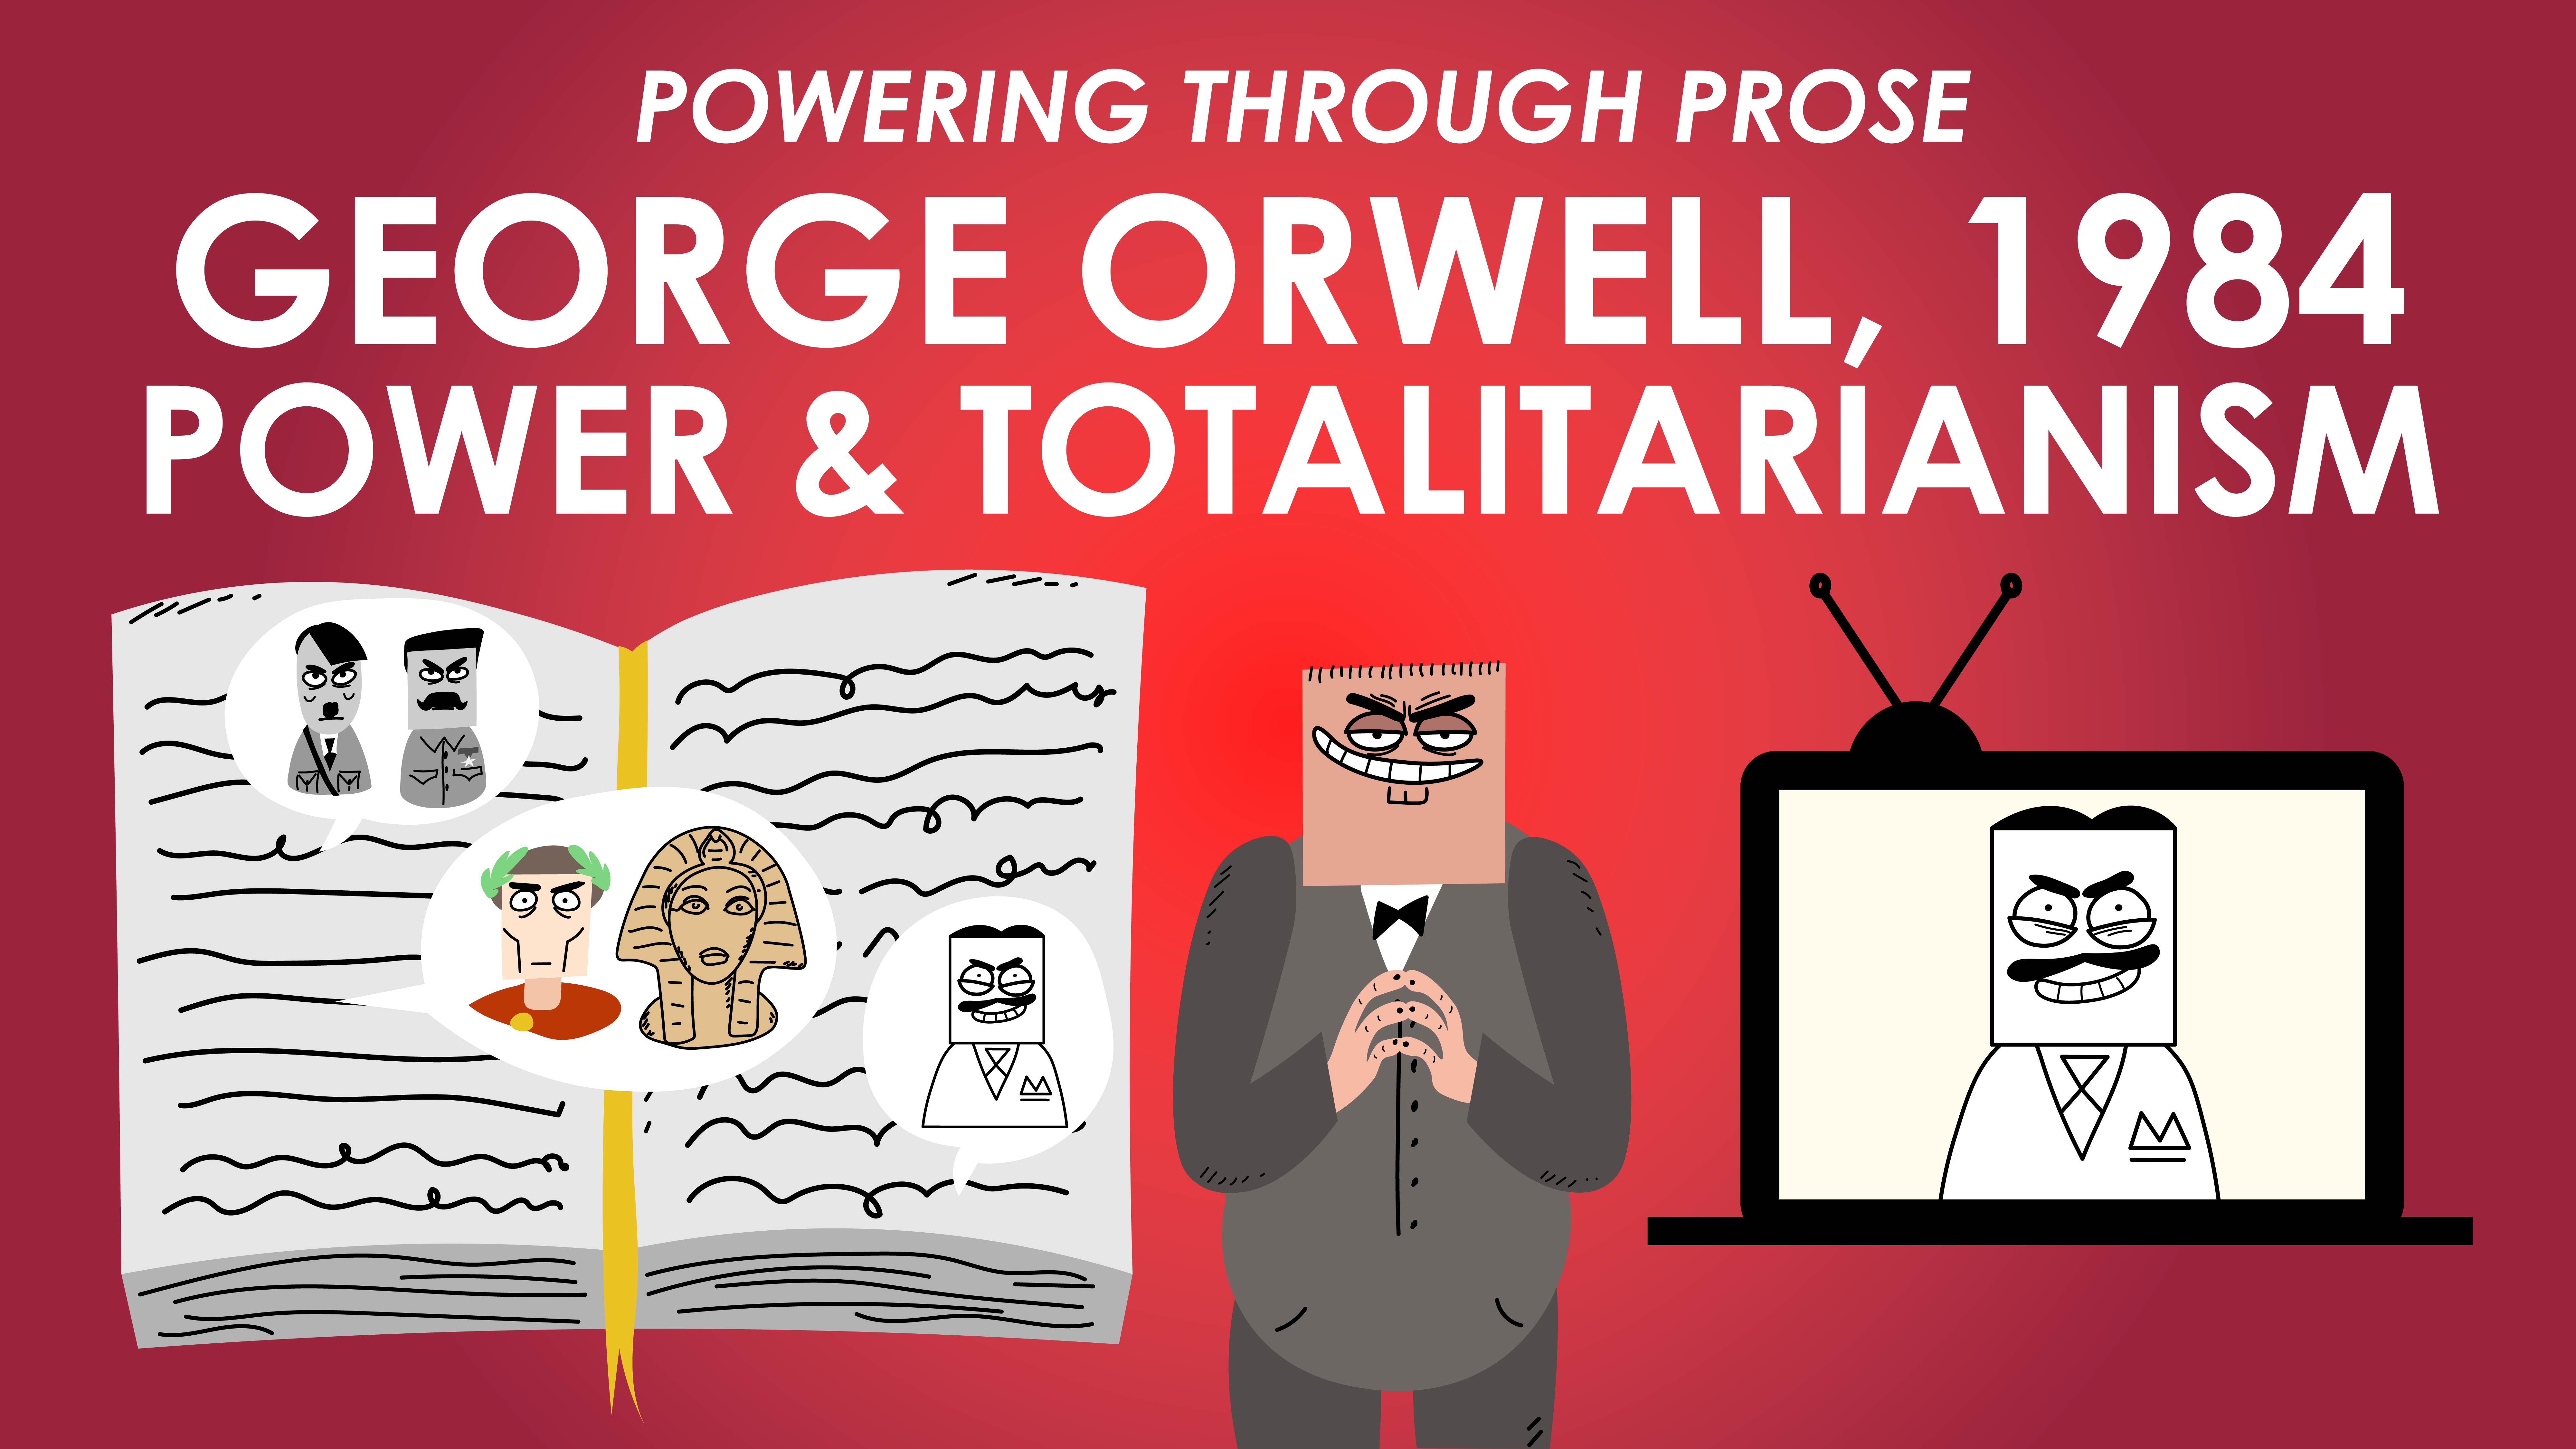 1984 - George Orwell - Theme of Power and Totalitarianism - Powering Through Prose Series